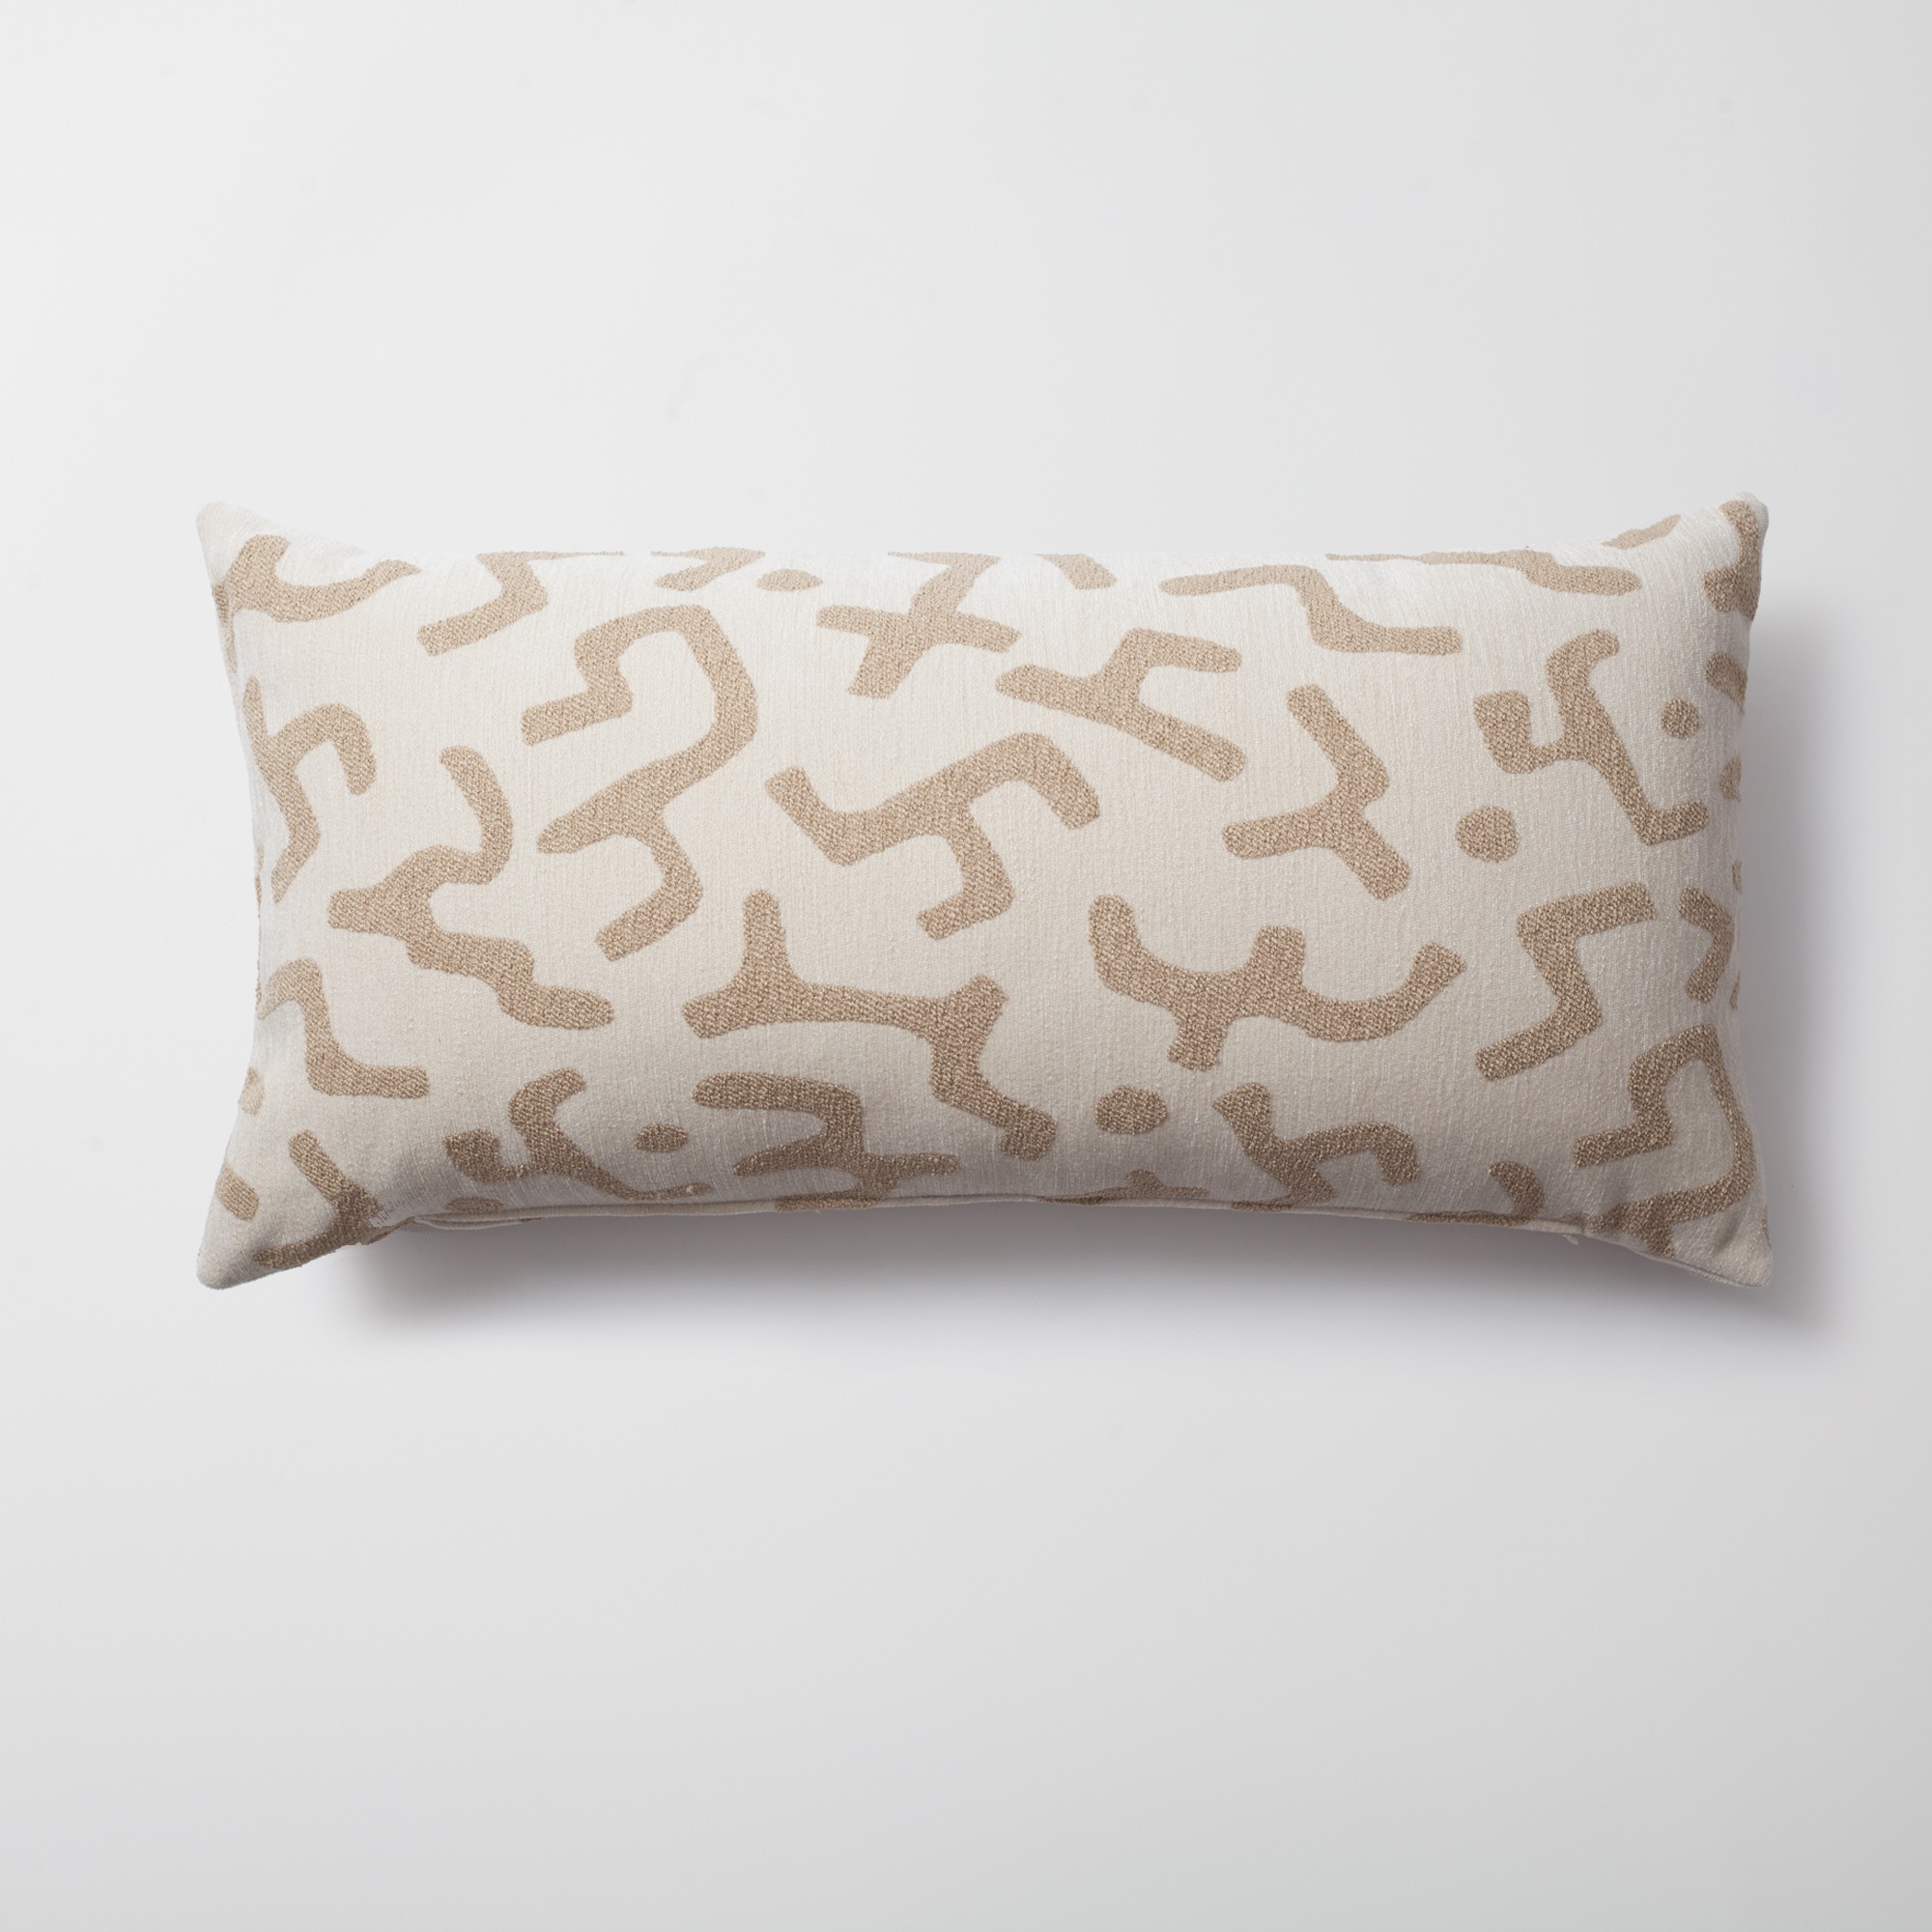 "Nandos" - Maze Patterned 14x28 Inch Pillow - Cream (Cover Only)